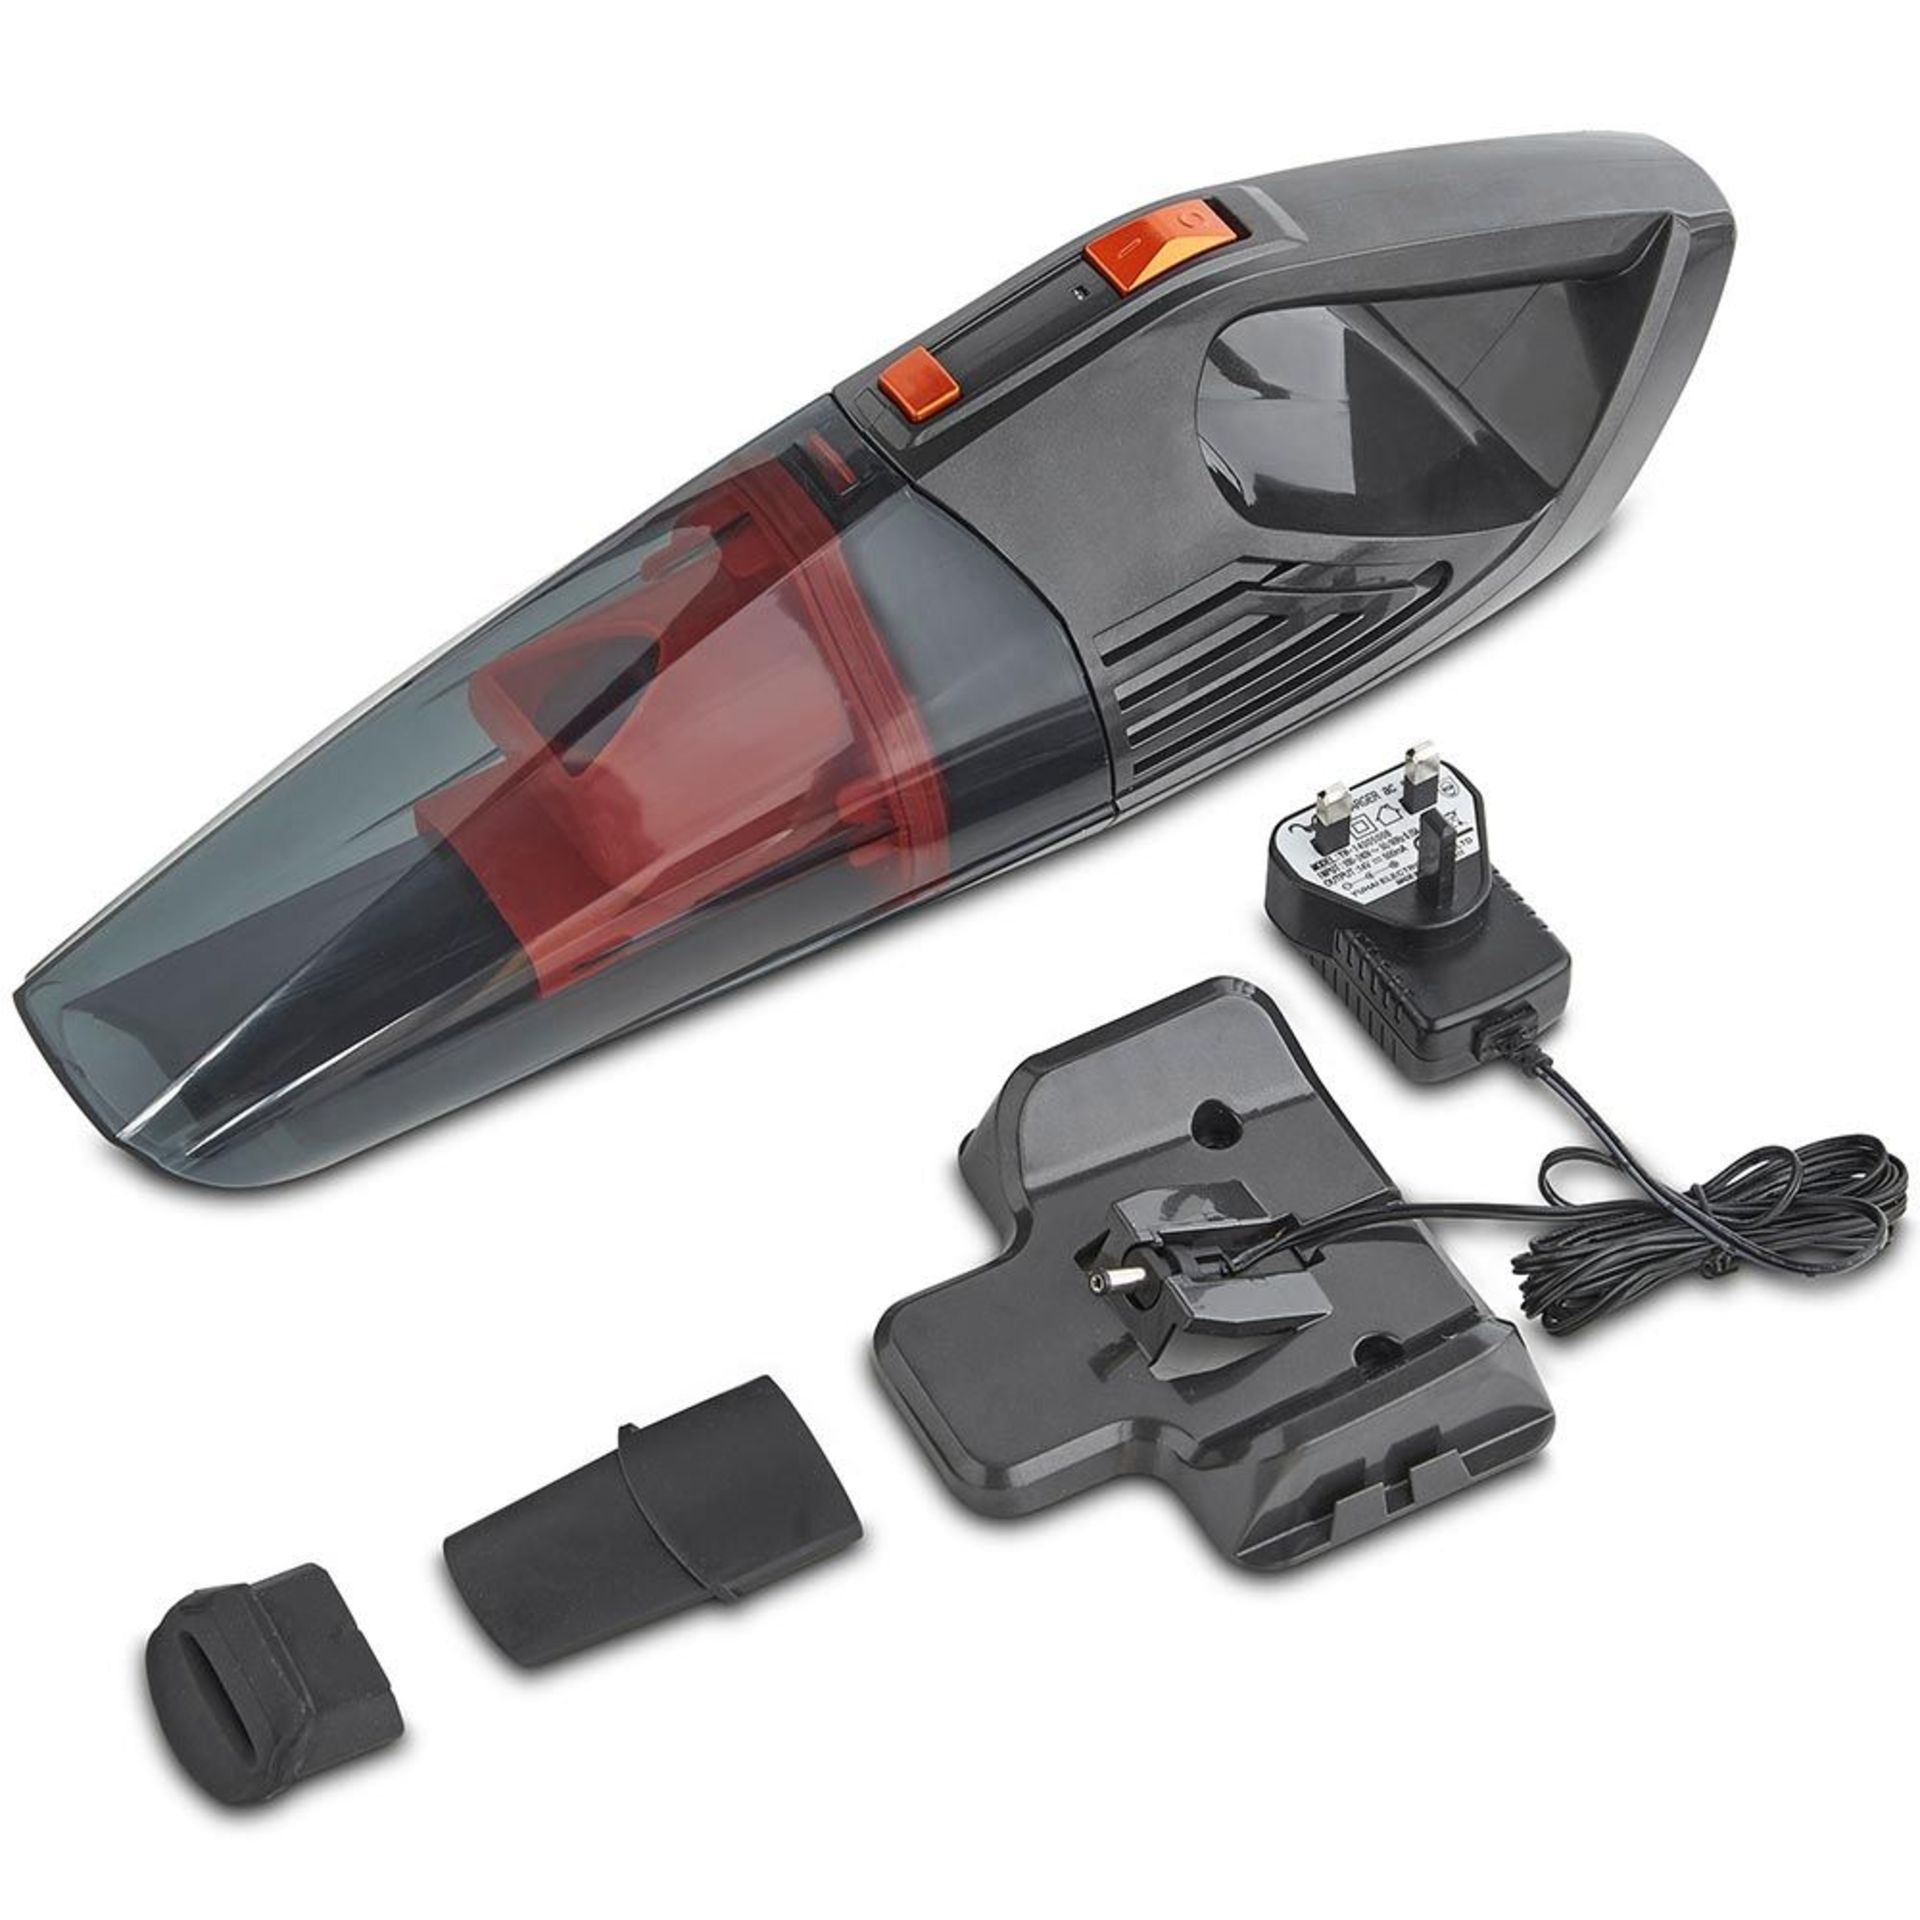 (KG46) 11.1V Wet & Dry Handheld Vacuum. Clean up wet and dry mess with ease thanks to the porta... - Image 5 of 5